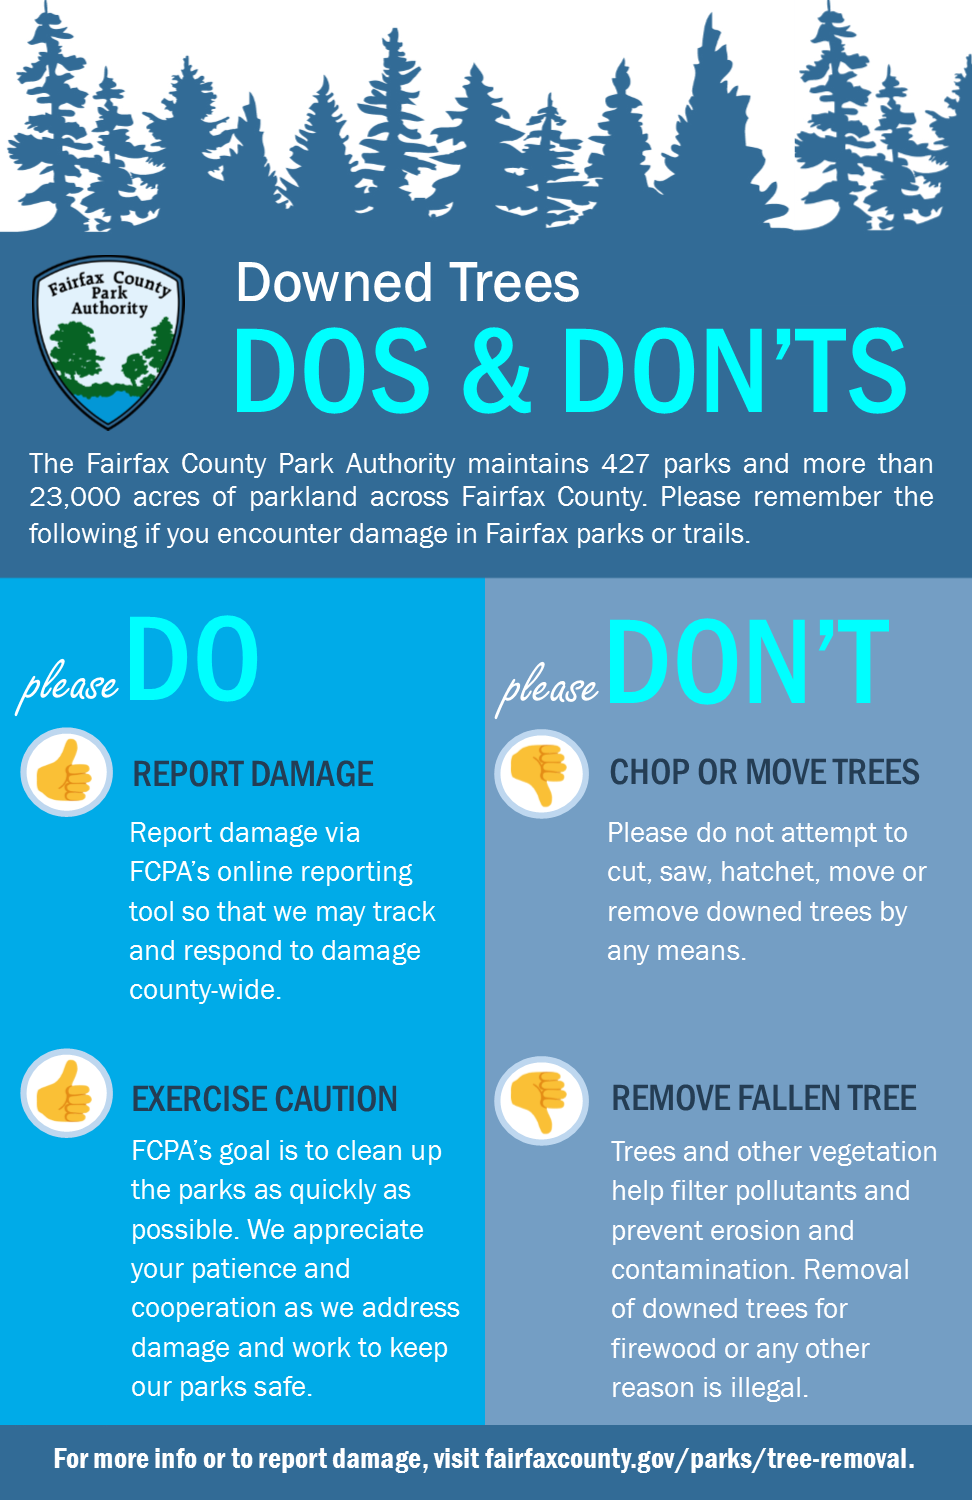 Downed Trees Dos &Don't